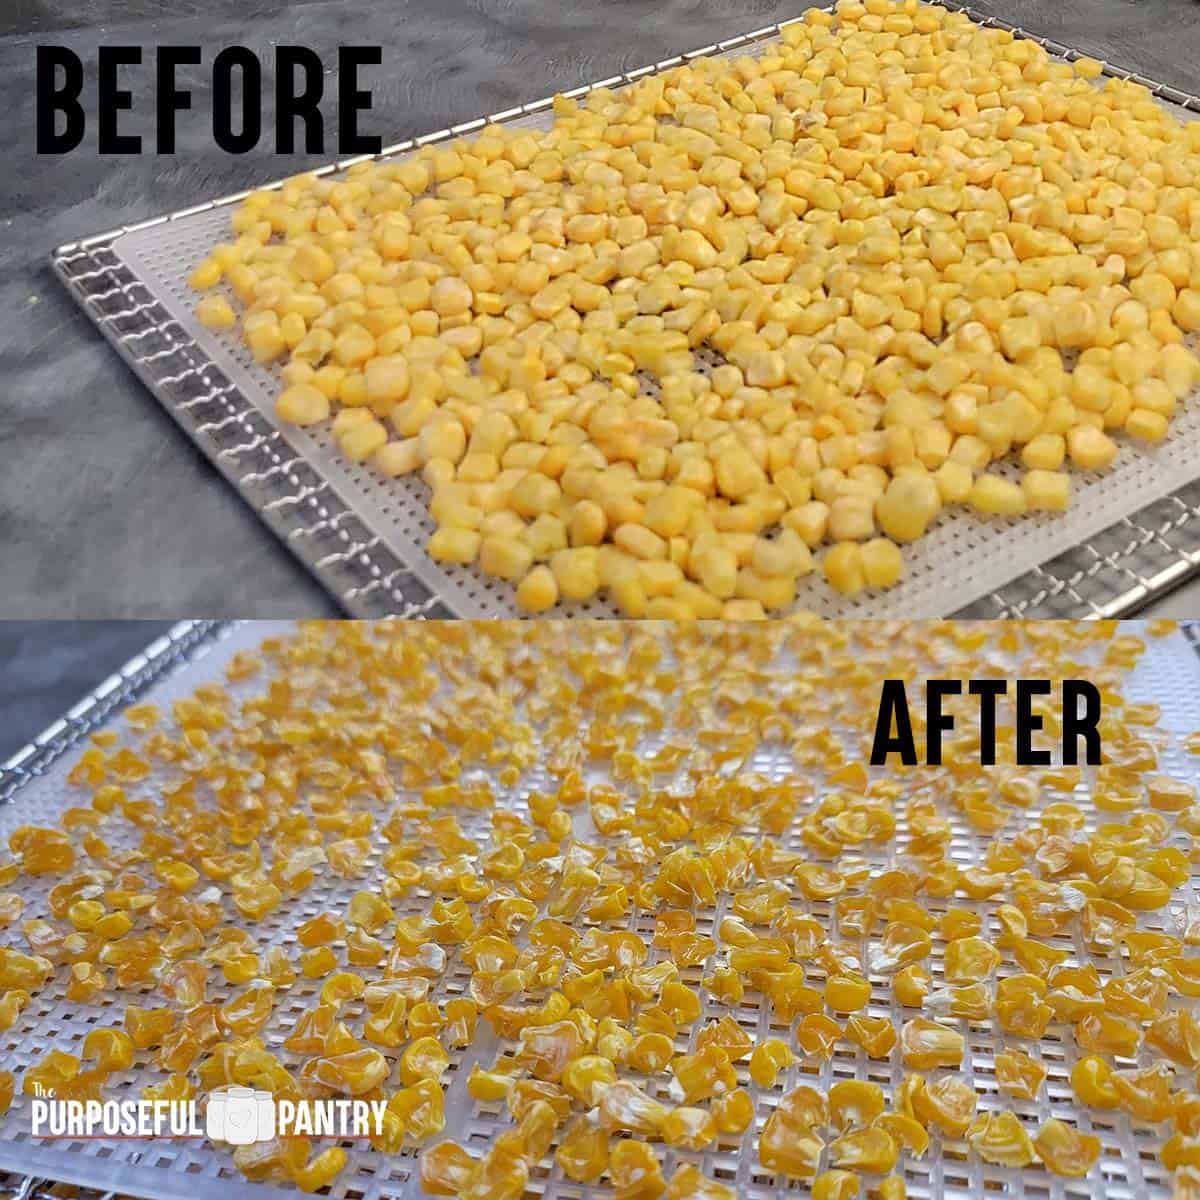 How To Dehydrate Peppers Onions Dehydrating Frozen Veggies Magic Mill Food  Dehydrator 